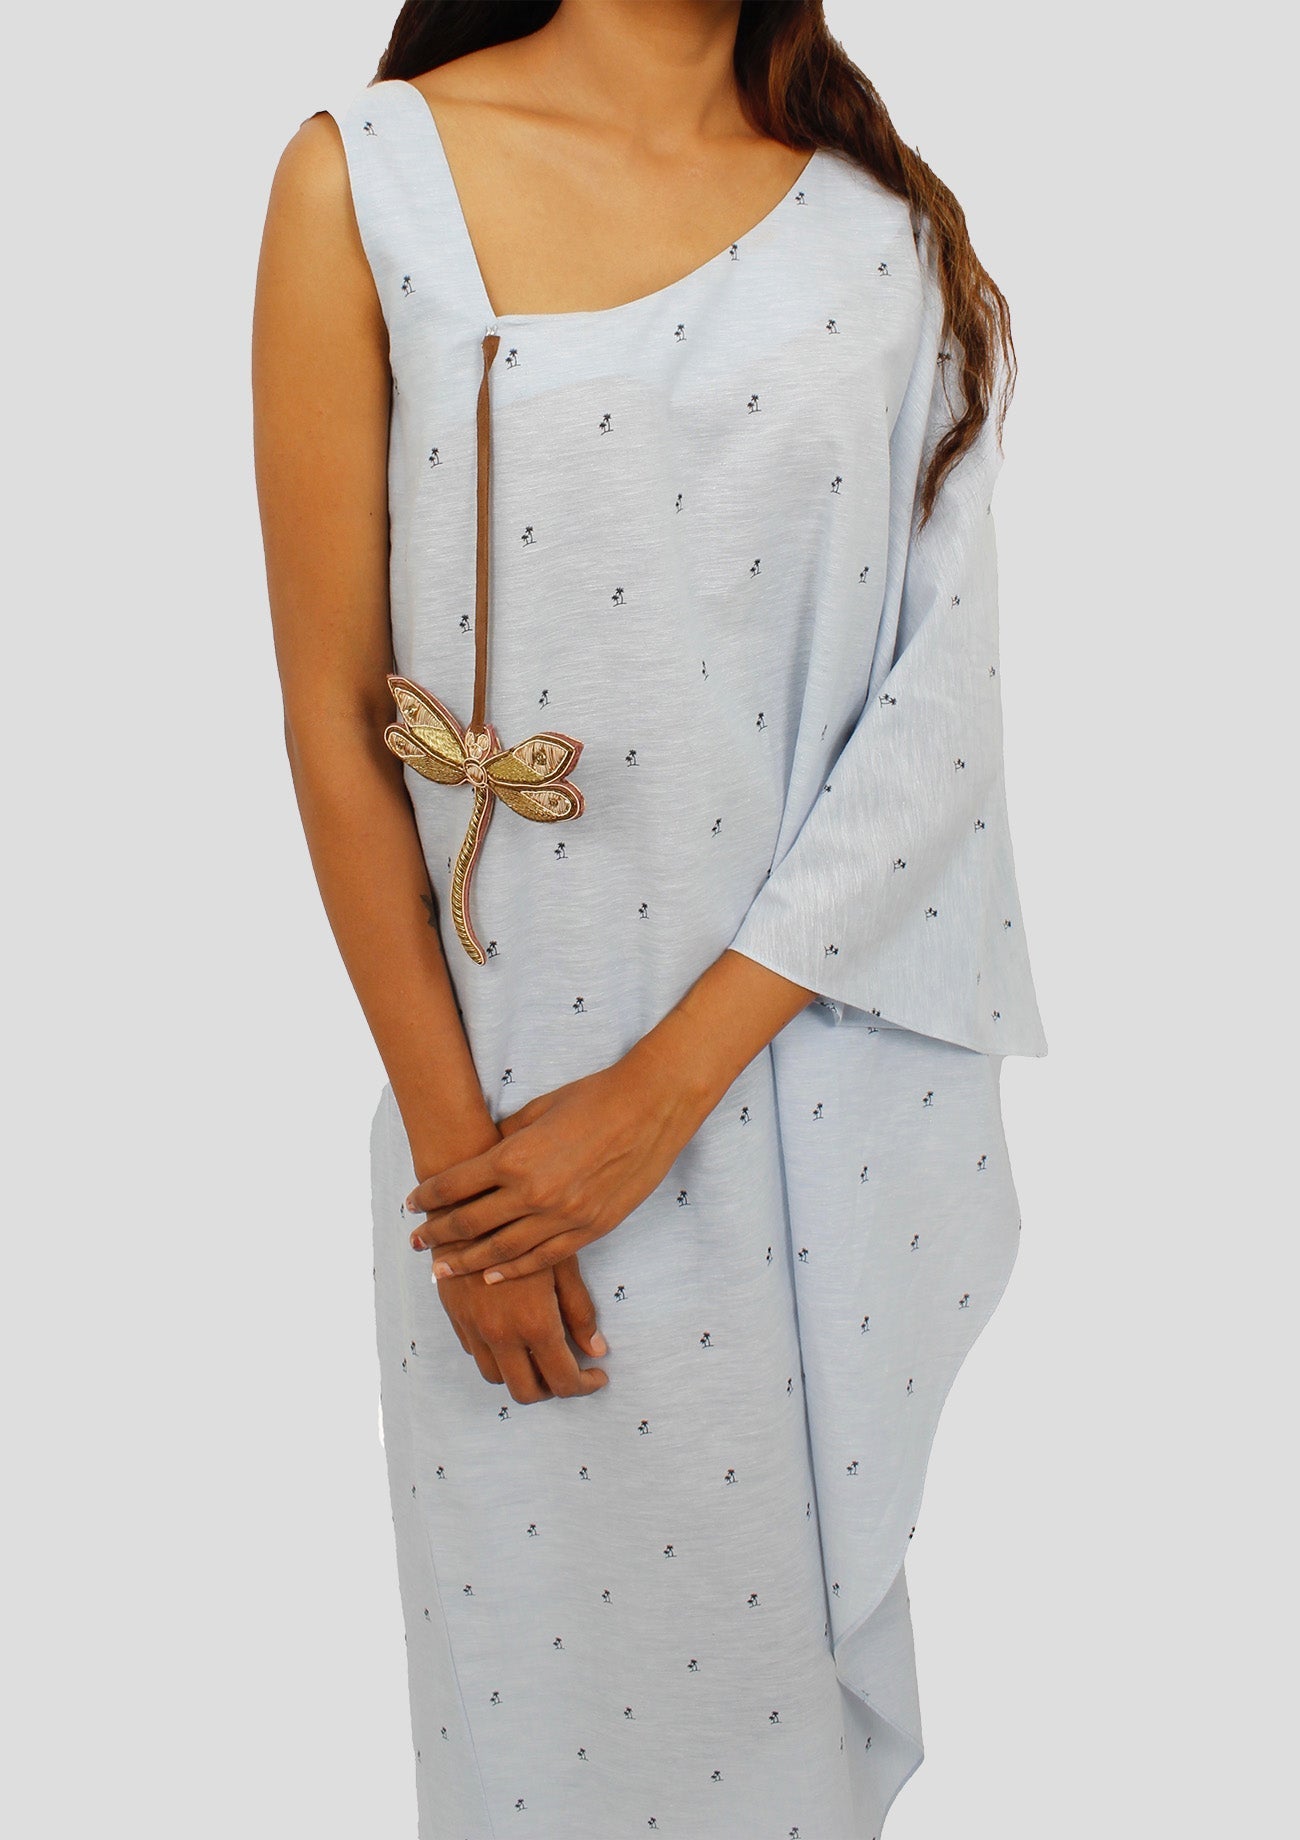 Sky Blue Cotton Printed Asymmetrical Top With Detachable Embroidered Dangler